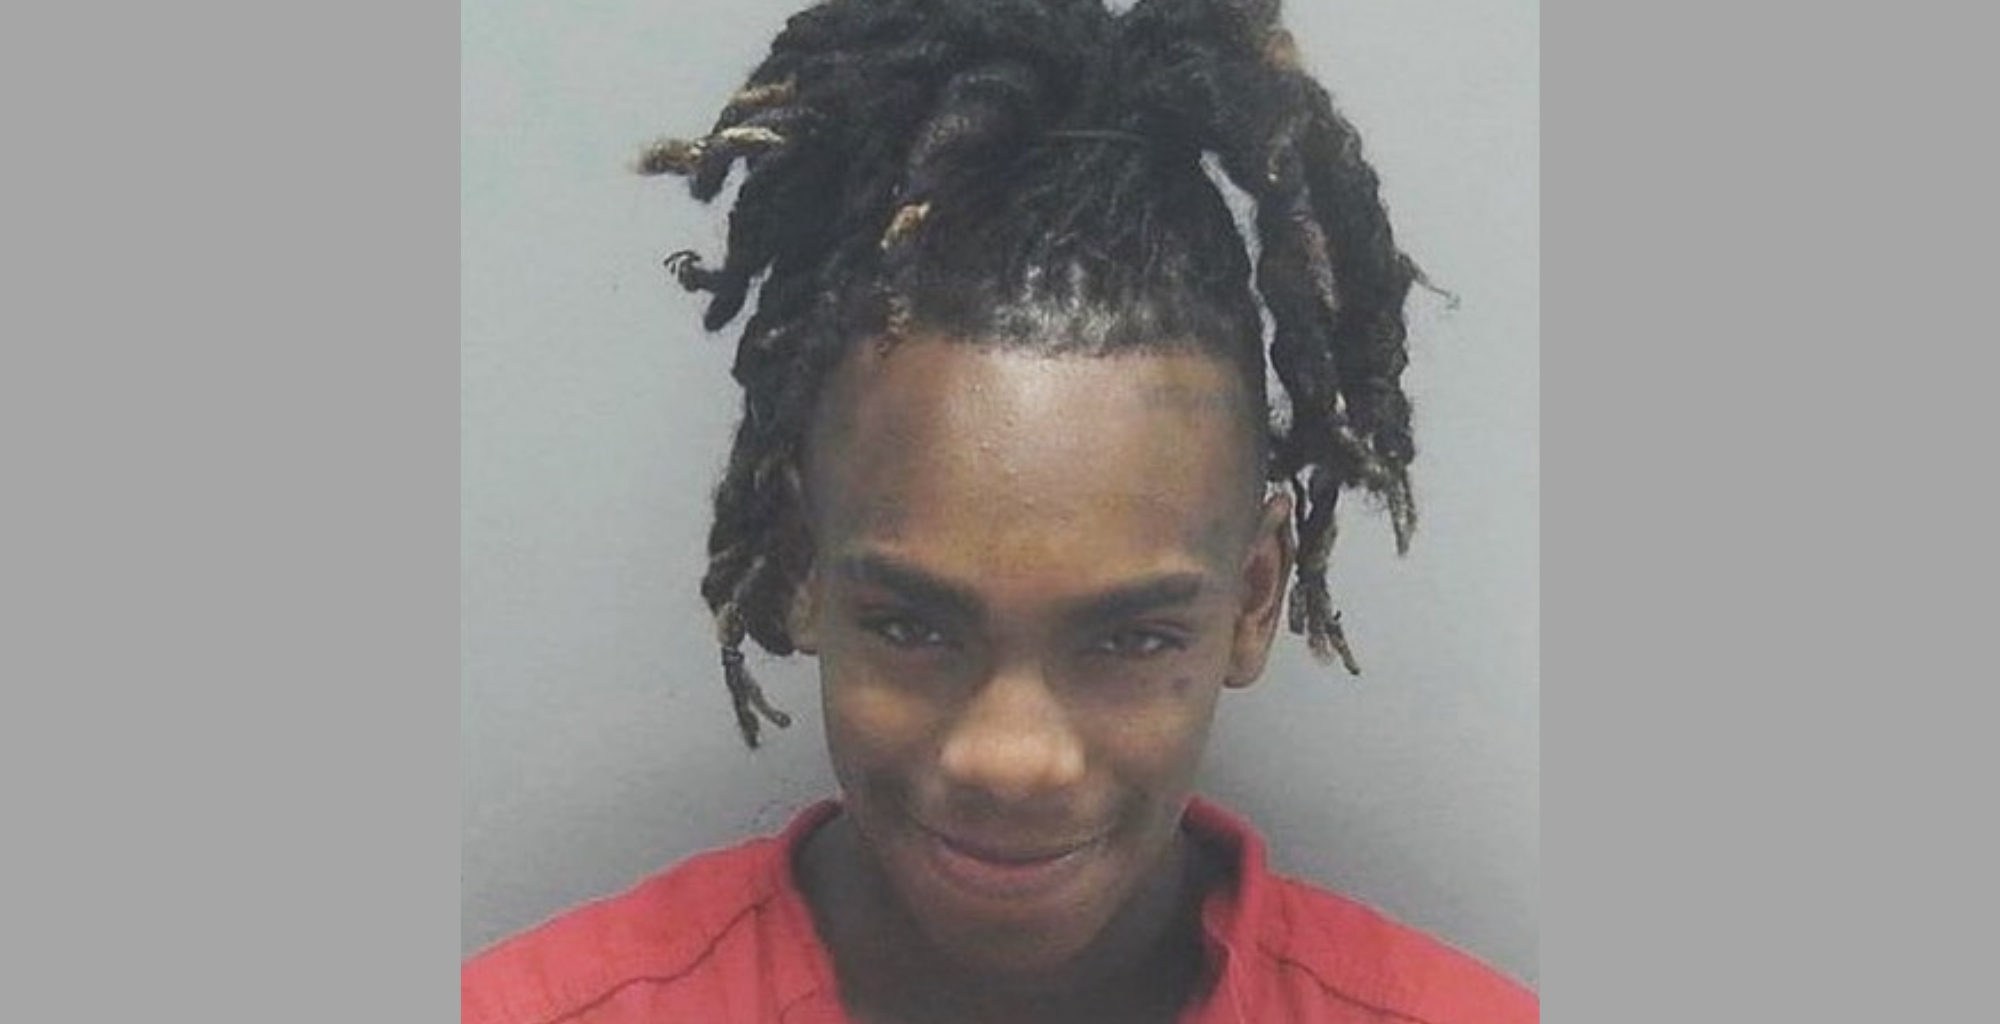 Police Ynw Melly Drove Around With Dead Bodies In Car